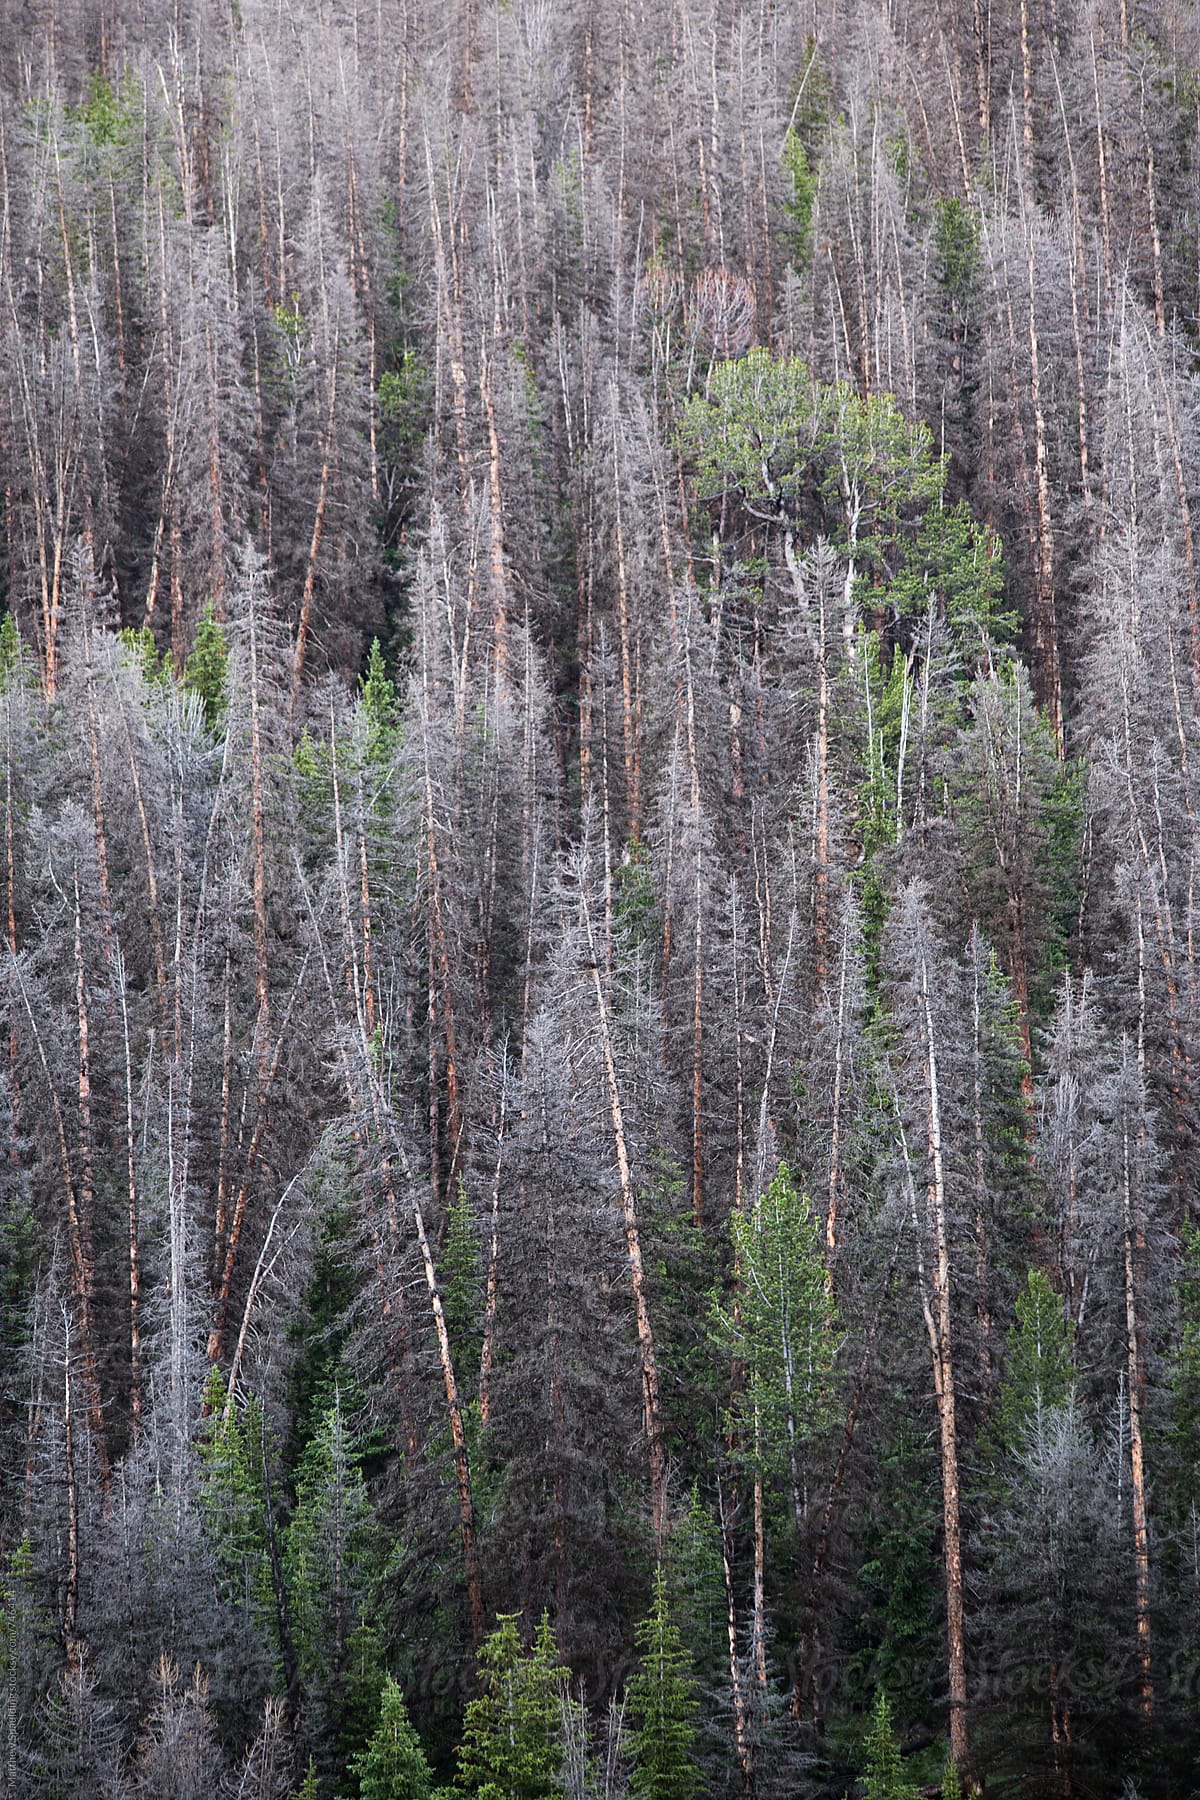 View of dead and living trees in Wyoming wilderness